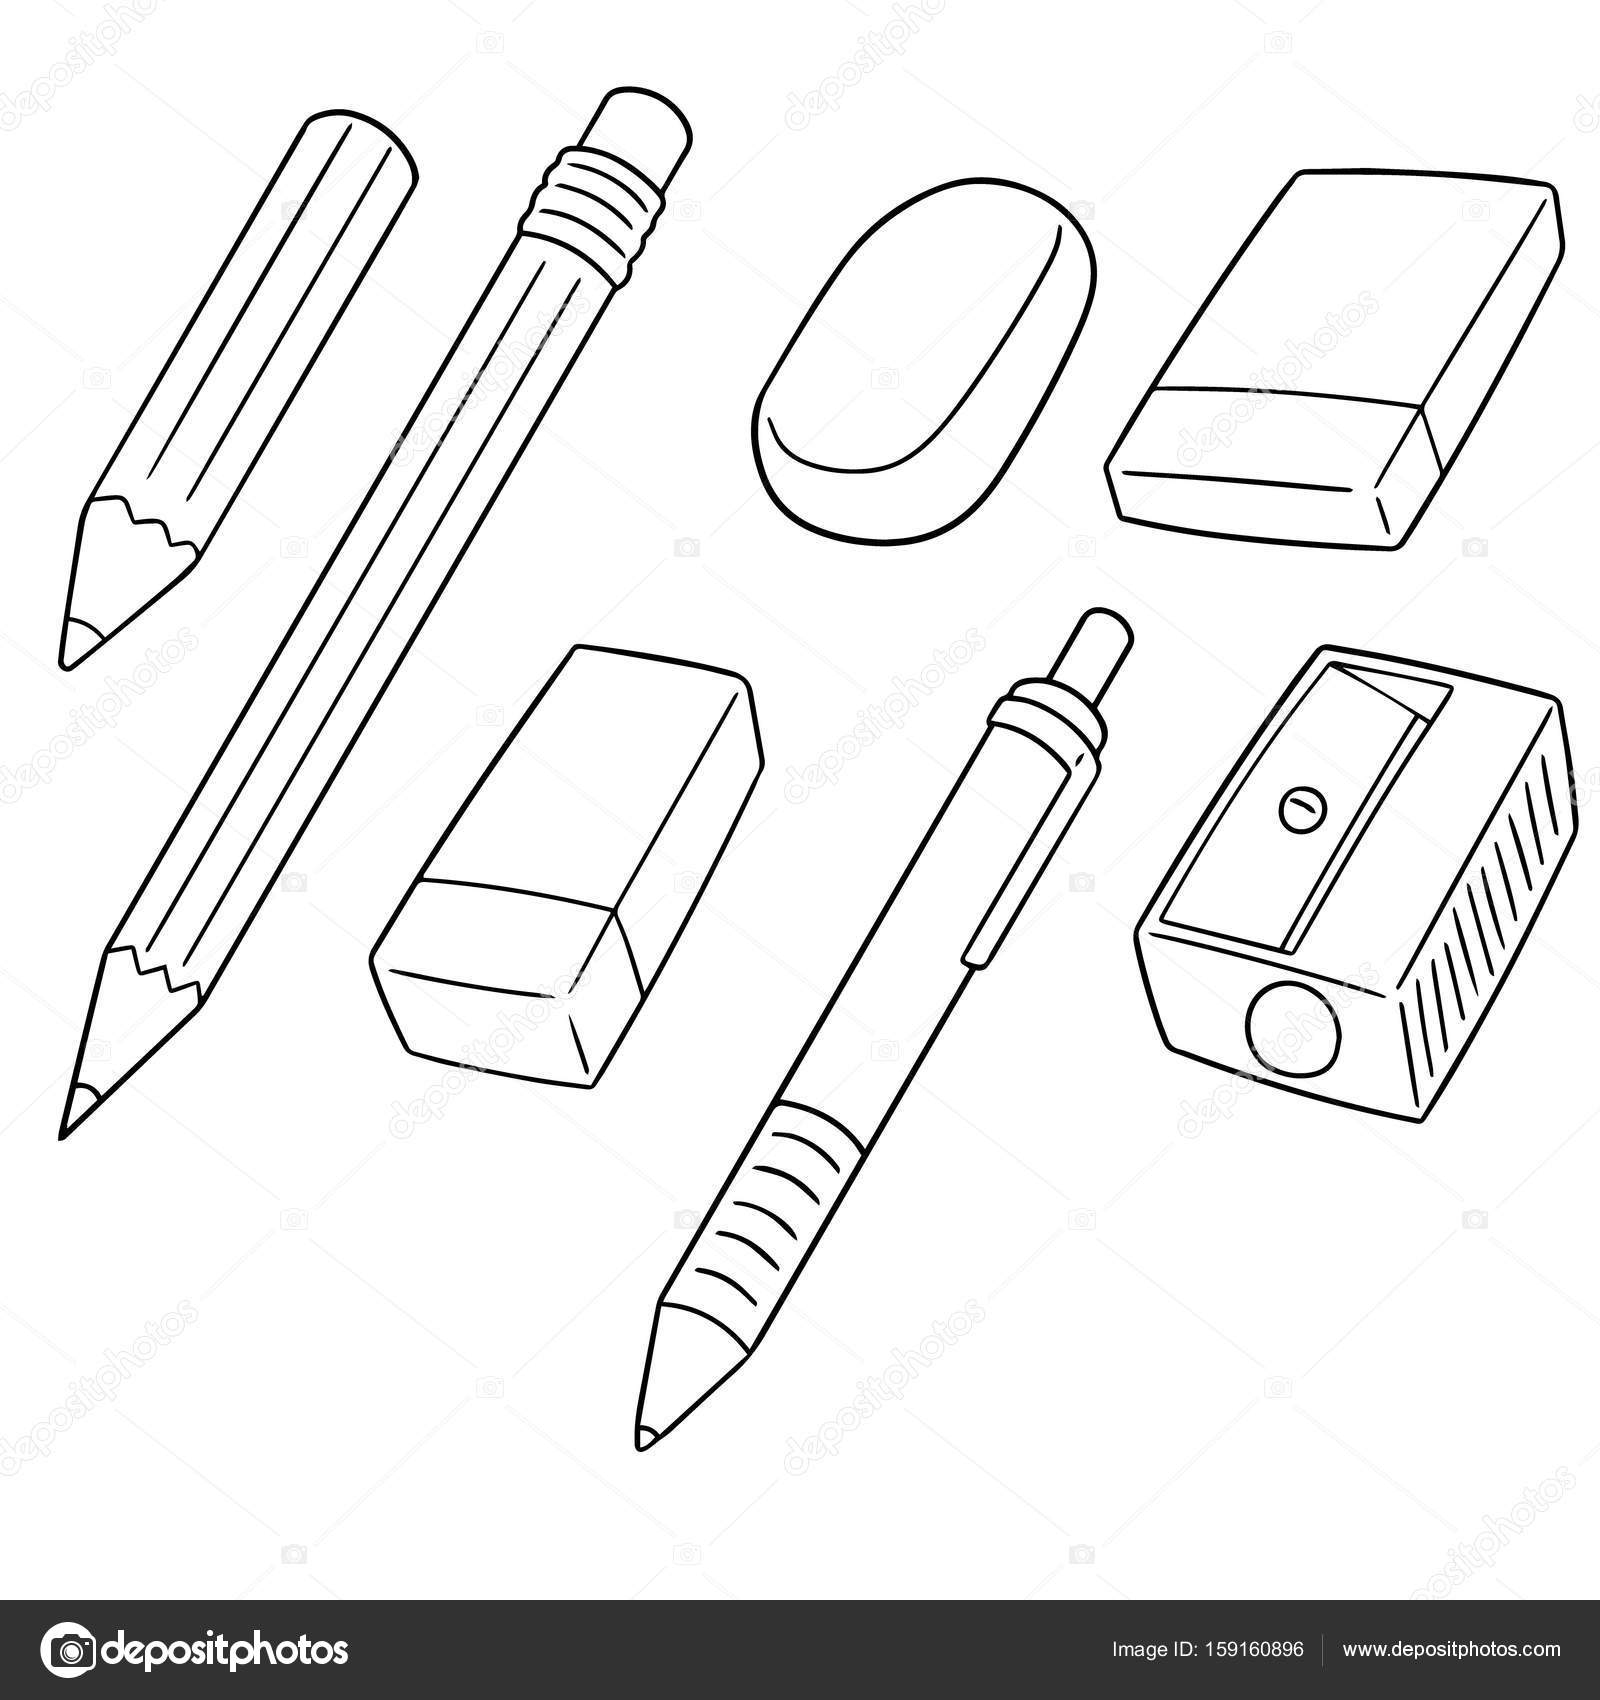 Realistic wooden graphite pencils, sharpener, eraser and shavings.  Sharpened pencil sizes, writing and drawing tools. Stationery vector set, Stock vector